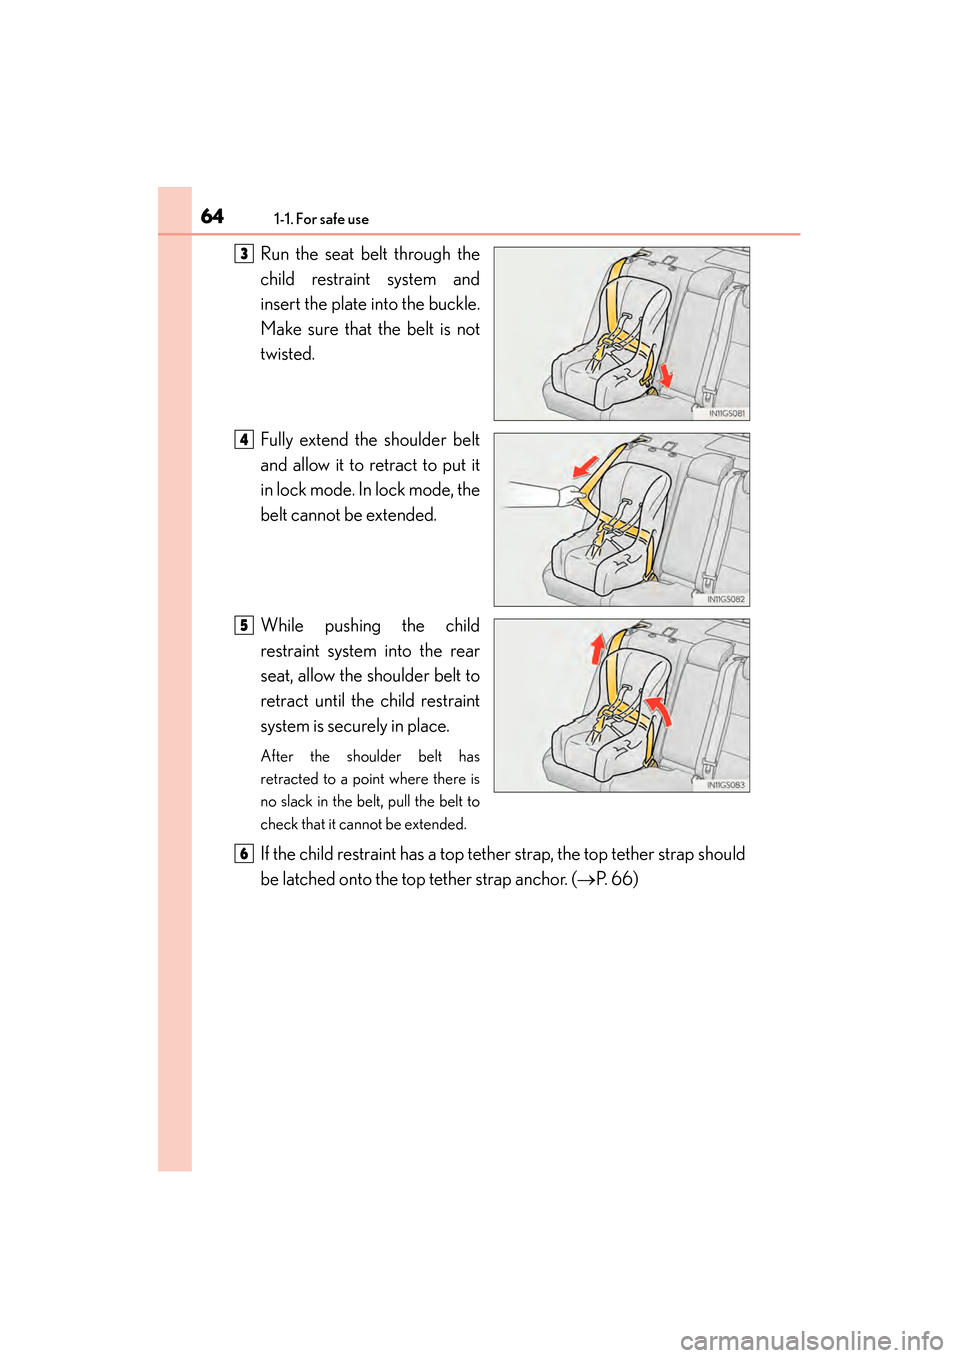 Lexus GS450h 2013 Owners Guide 641-1. For safe use
GS450h_U (OM30D01U)Run the seat belt through the
child restraint system and
insert the plate into the buckle.
Make sure that the belt is not
twisted.
Fully extend the shoulder belt